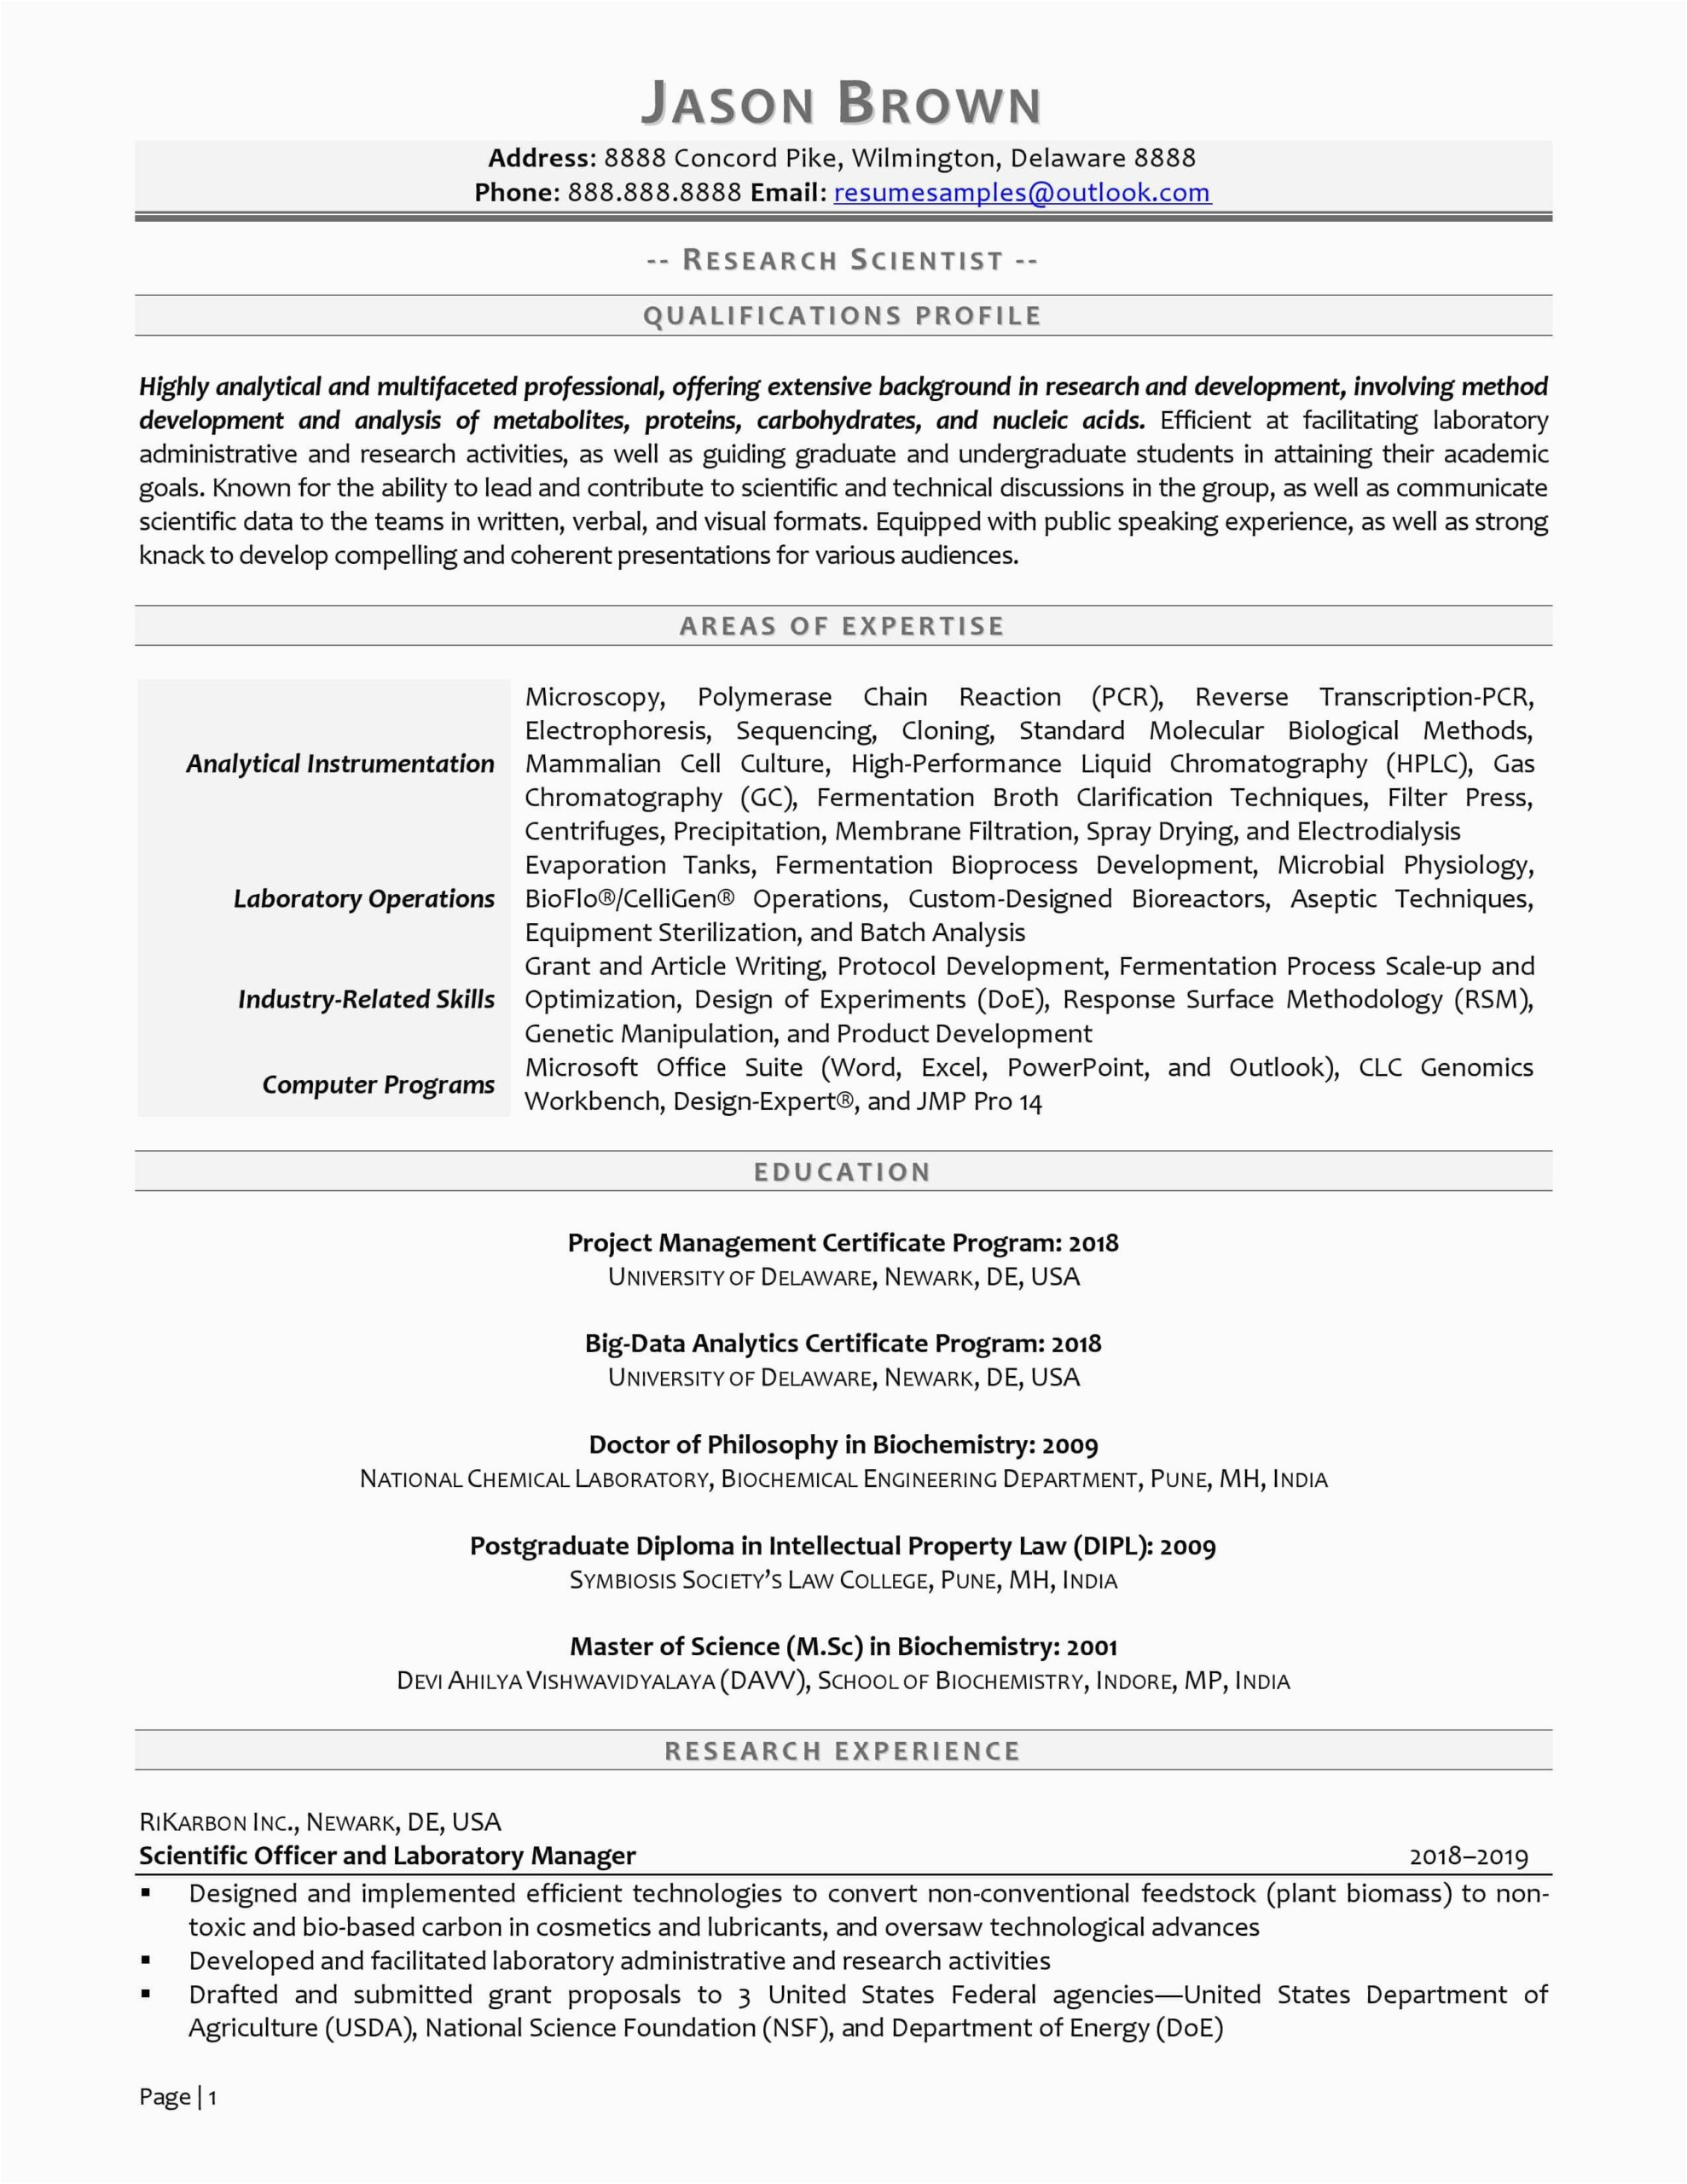 Sample Resume Objective for Research Position Research Scientist Resume Example